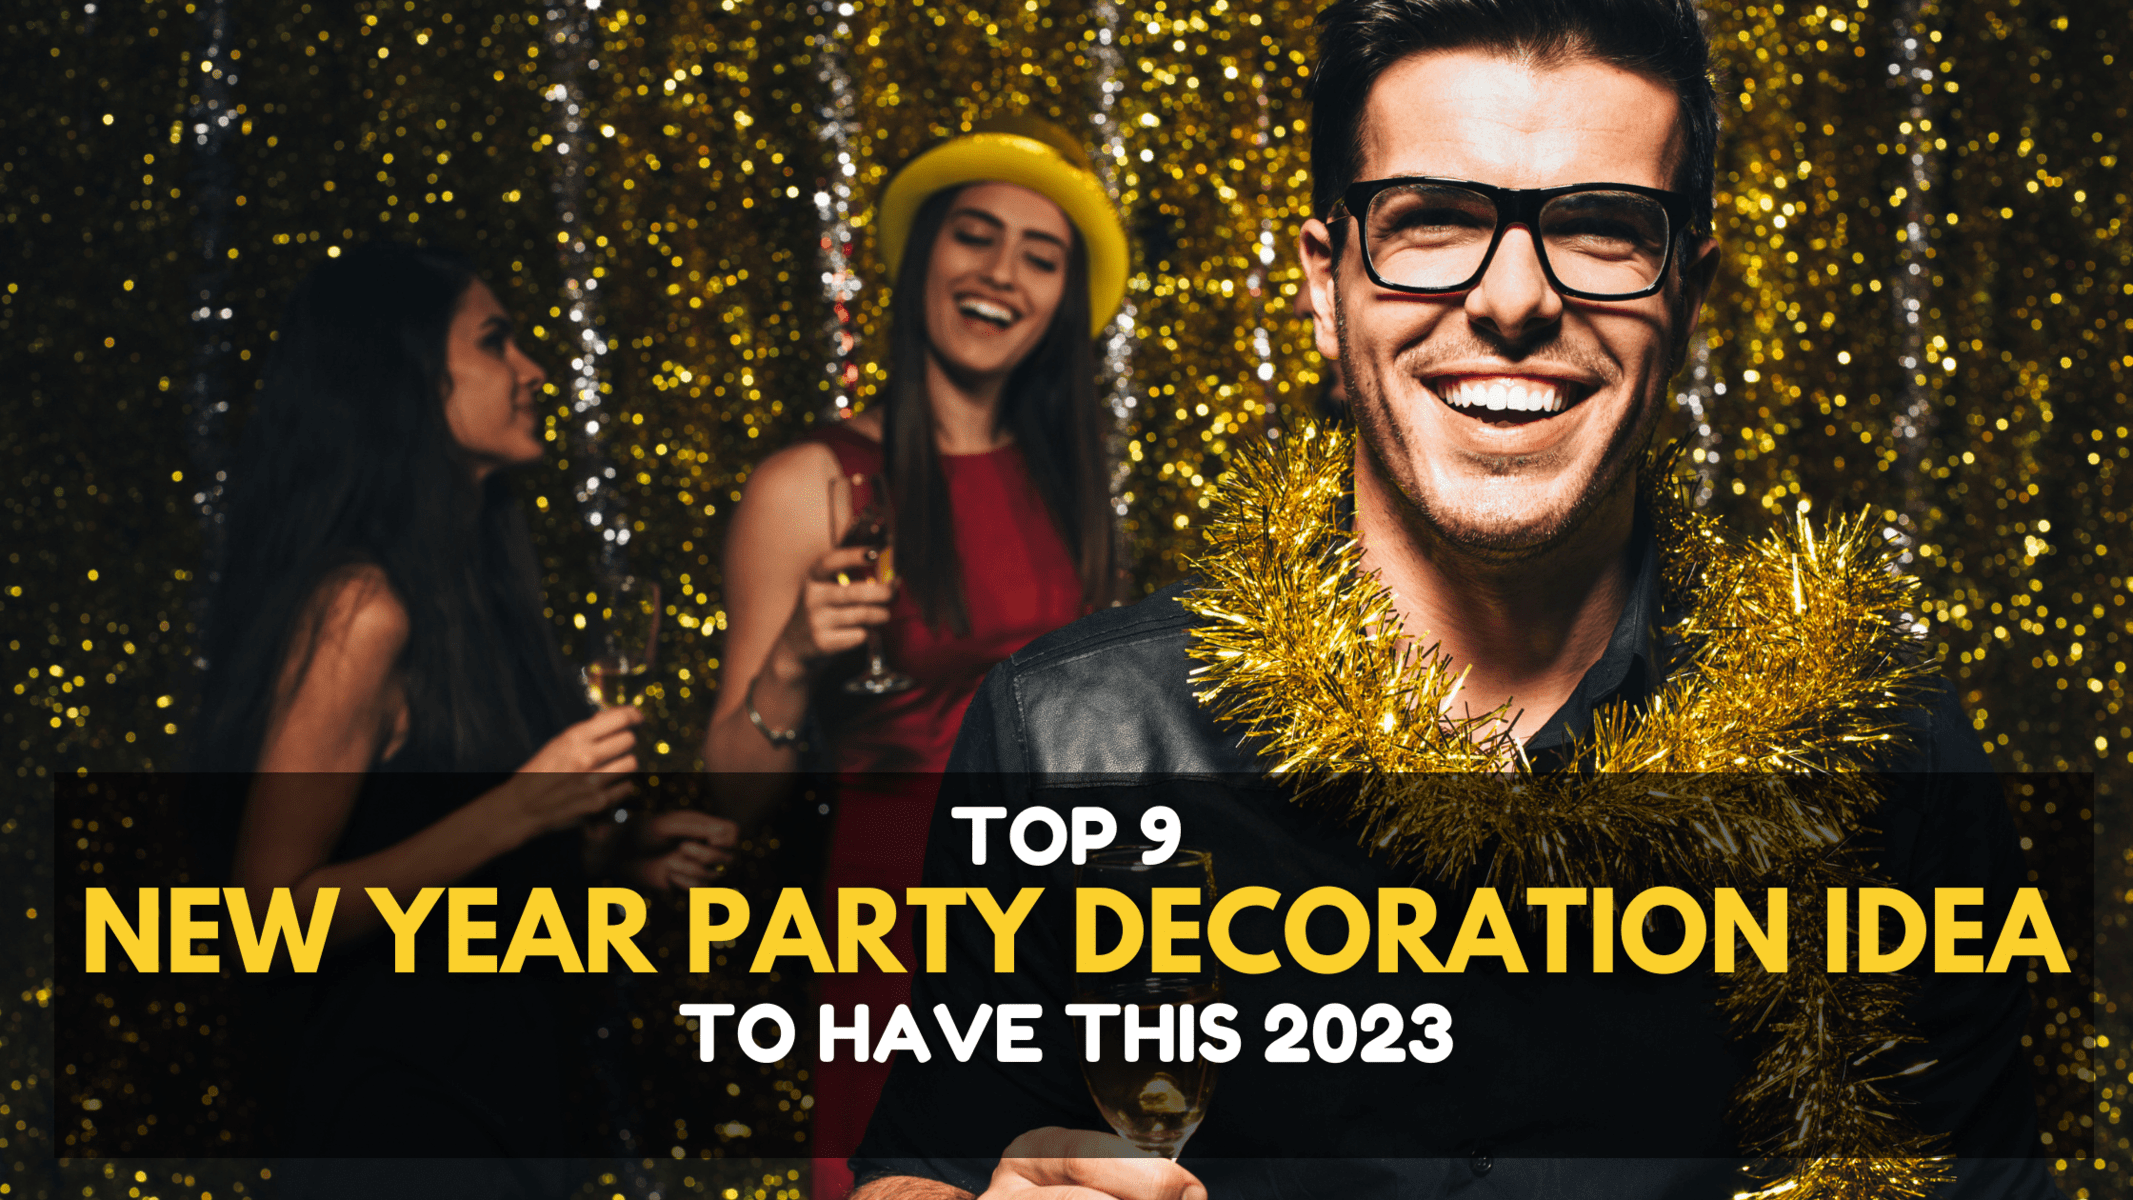 Top 9 New Year Party Decoration Ideas To Have This 2023